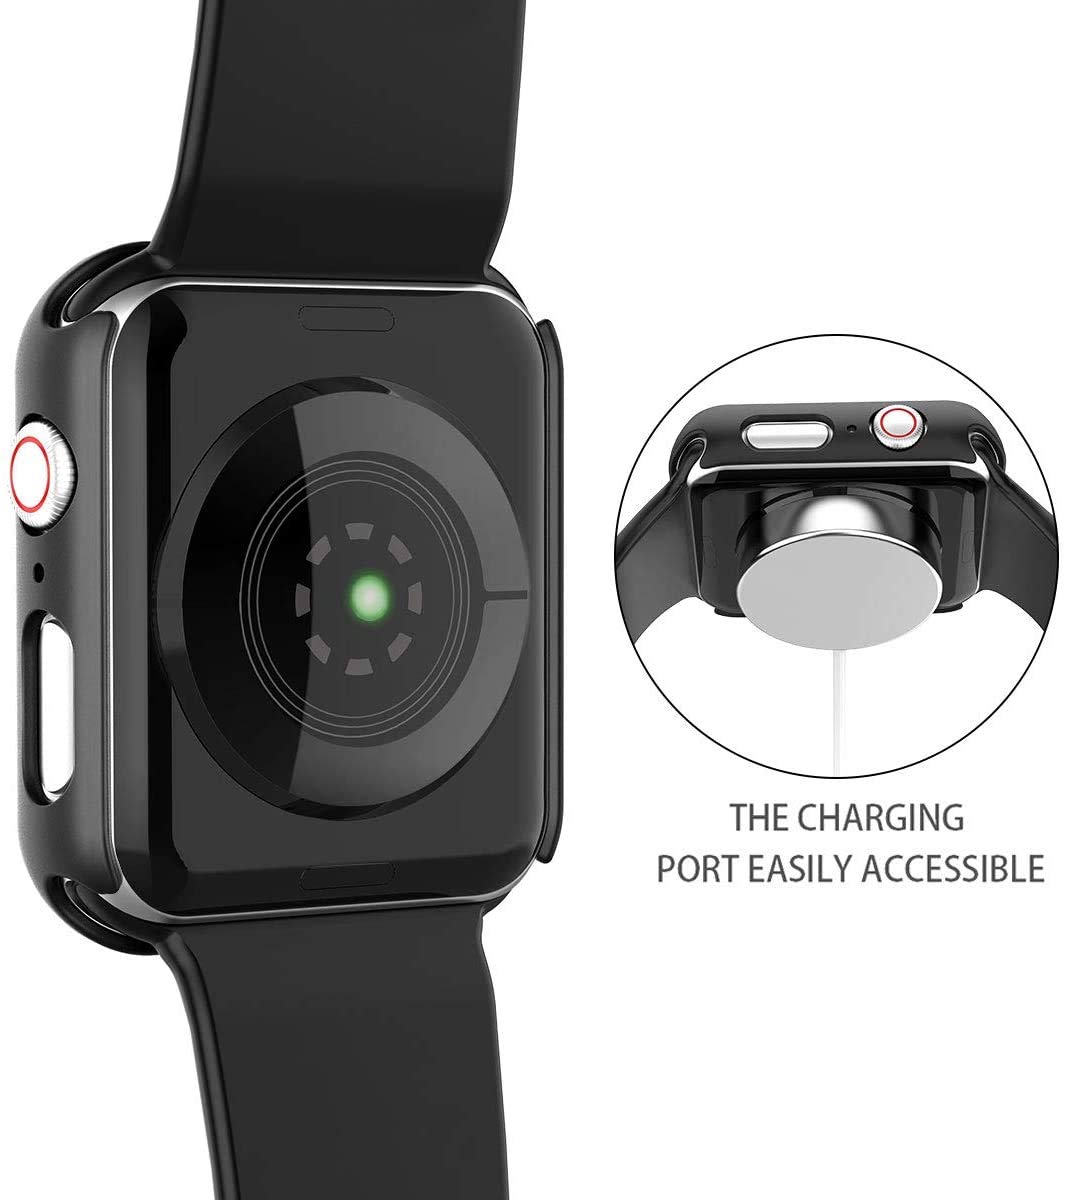 Misxi 2 Pack Hard PC Case with Tempered Glass Screen Protector Compatible with Apple Watch SE Series 6 Series 5 Series 4 40mm - Black